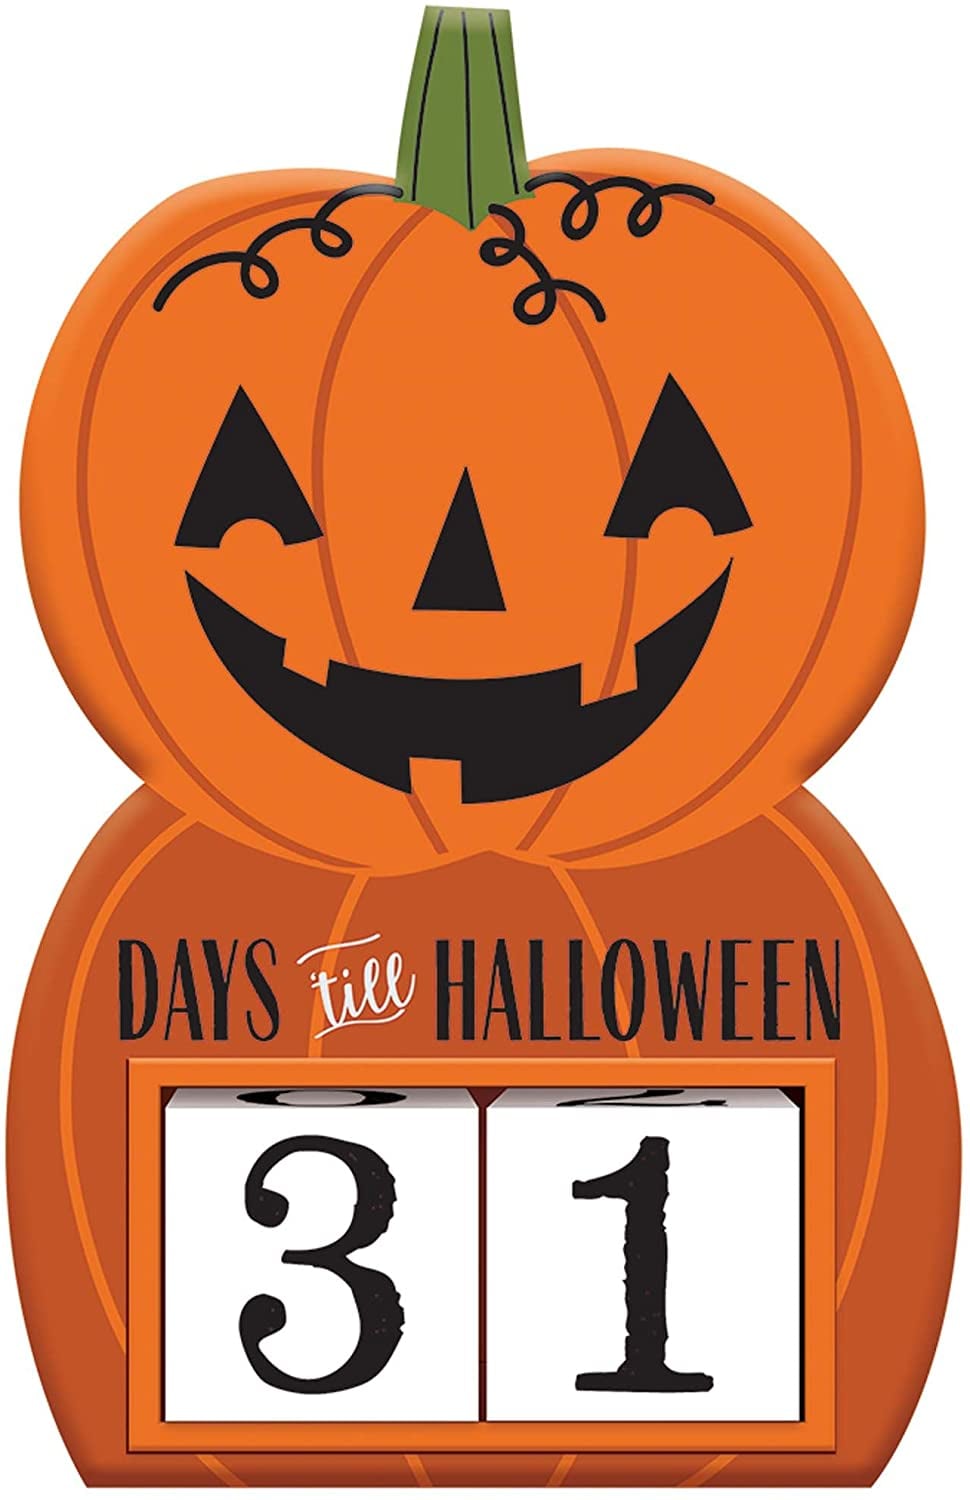 √ How many hours away is halloween